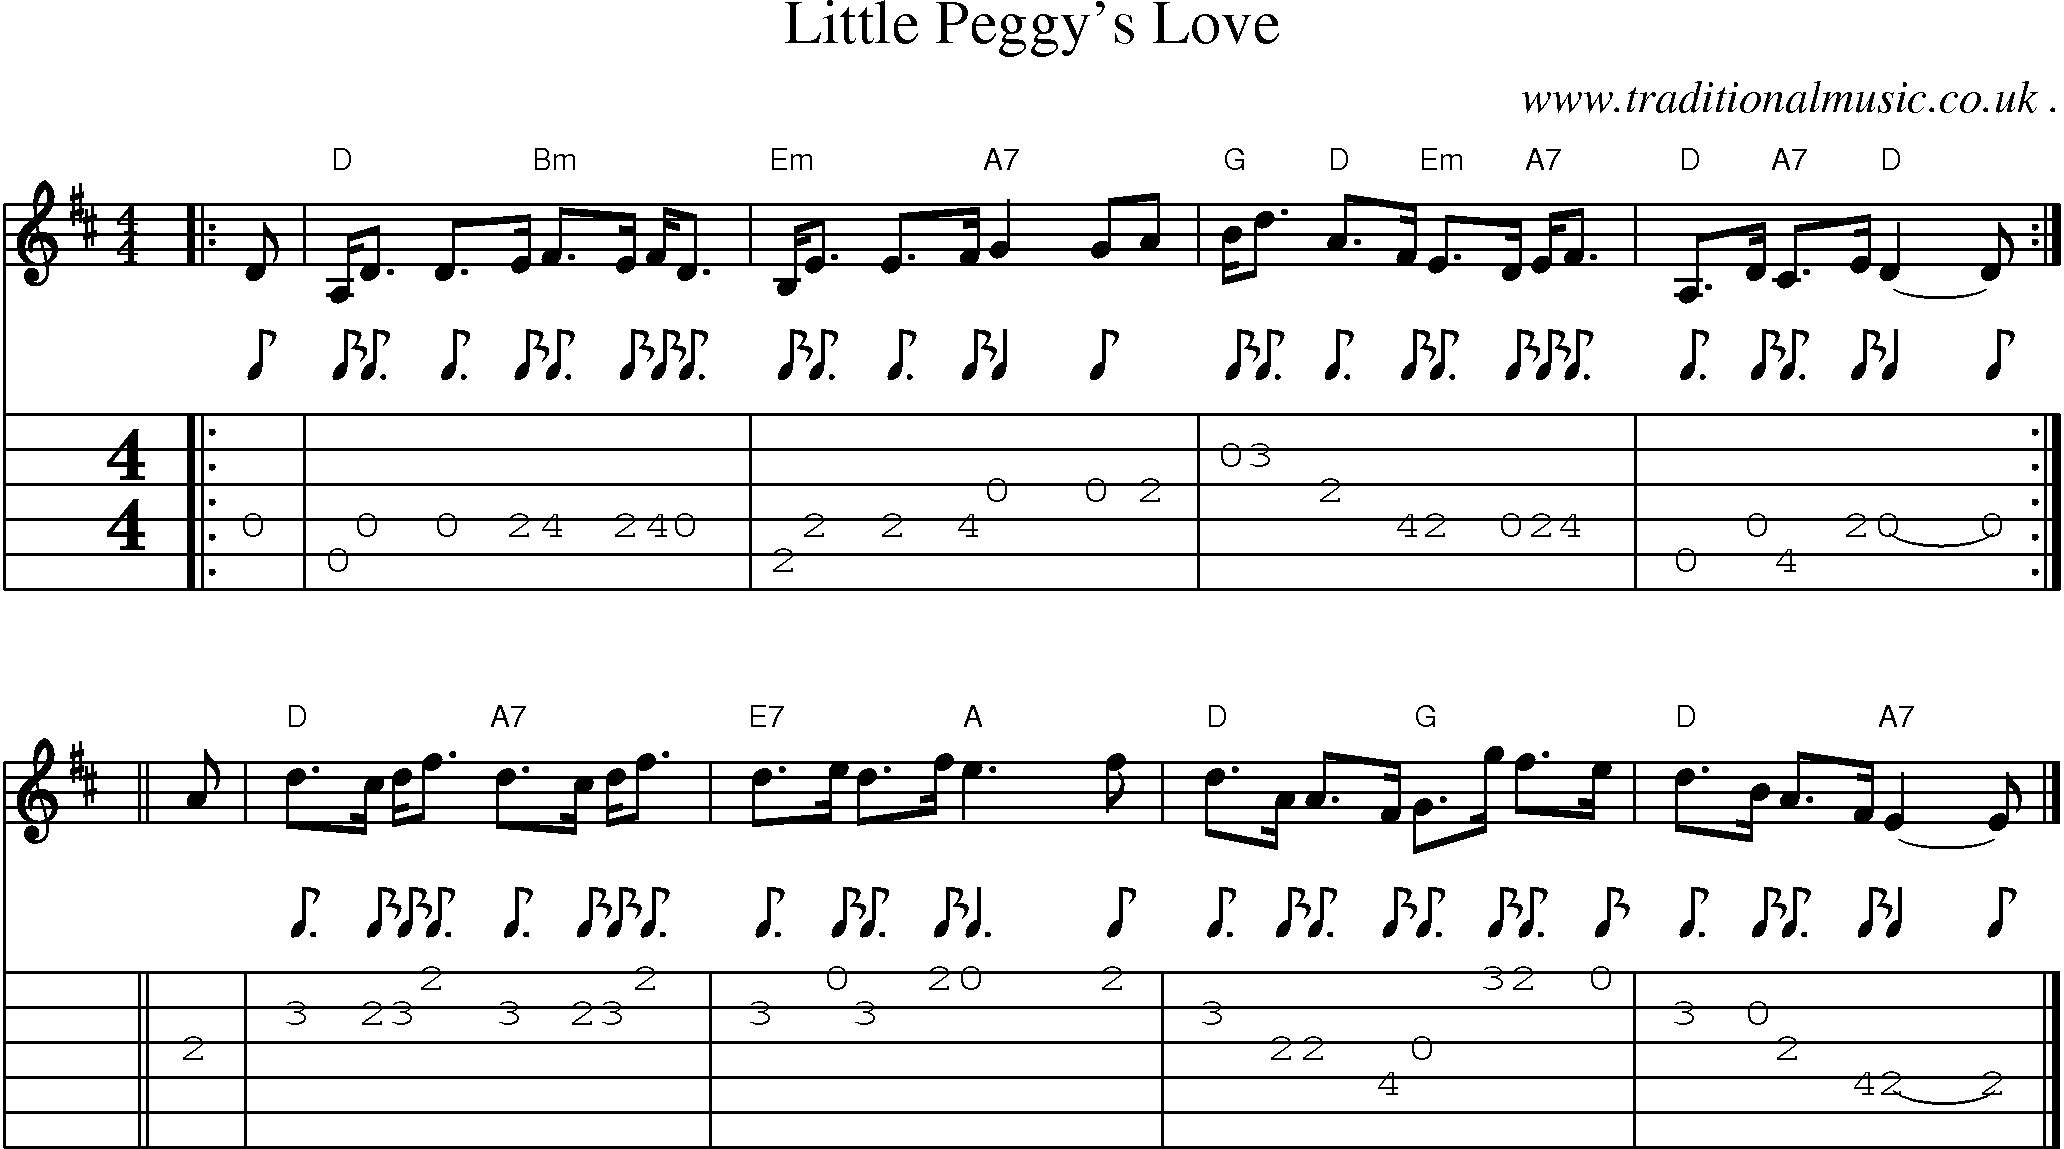 Sheet-music  score, Chords and Guitar Tabs for Little Peggys Love